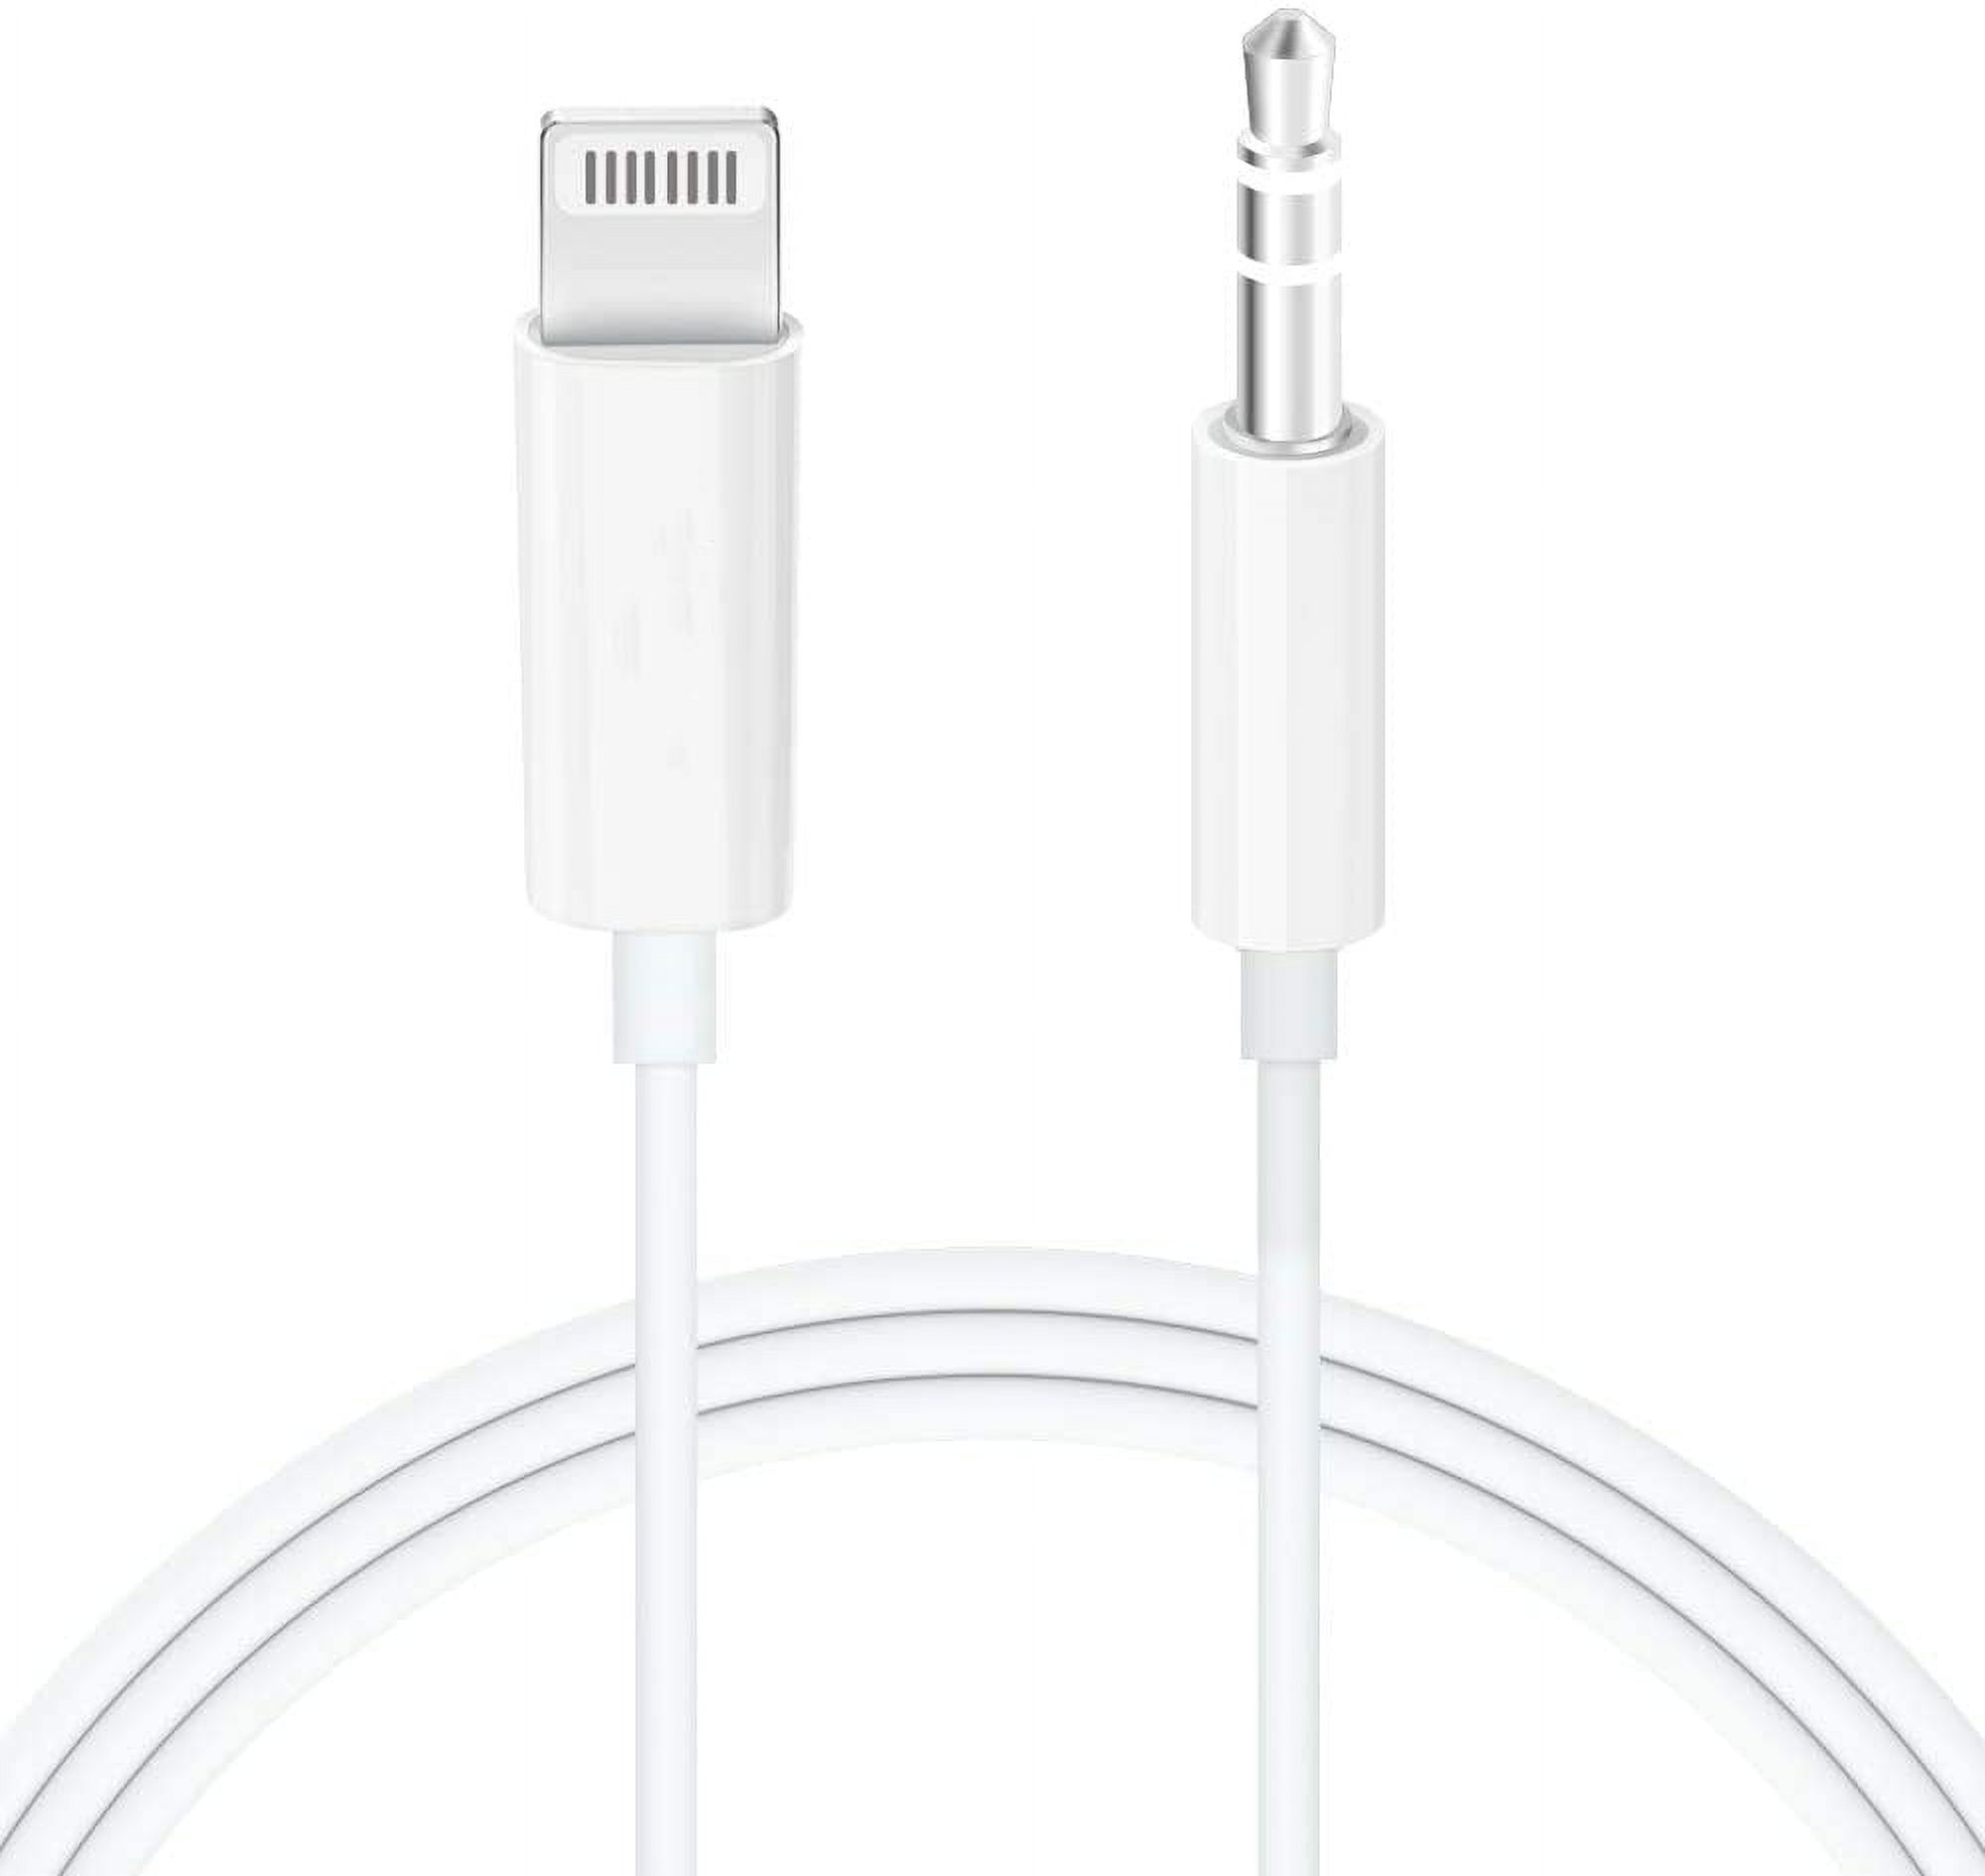 Aux Cord Compatible with iPhone,3.5mm Aux Cable for Car Compatible with iPhone 8/7/11/XS/XR/X/iPad/iPod for Car/Home Stereo, Speaker, Headphone, Support All iOS Version - 3.3ft White - image 1 of 7